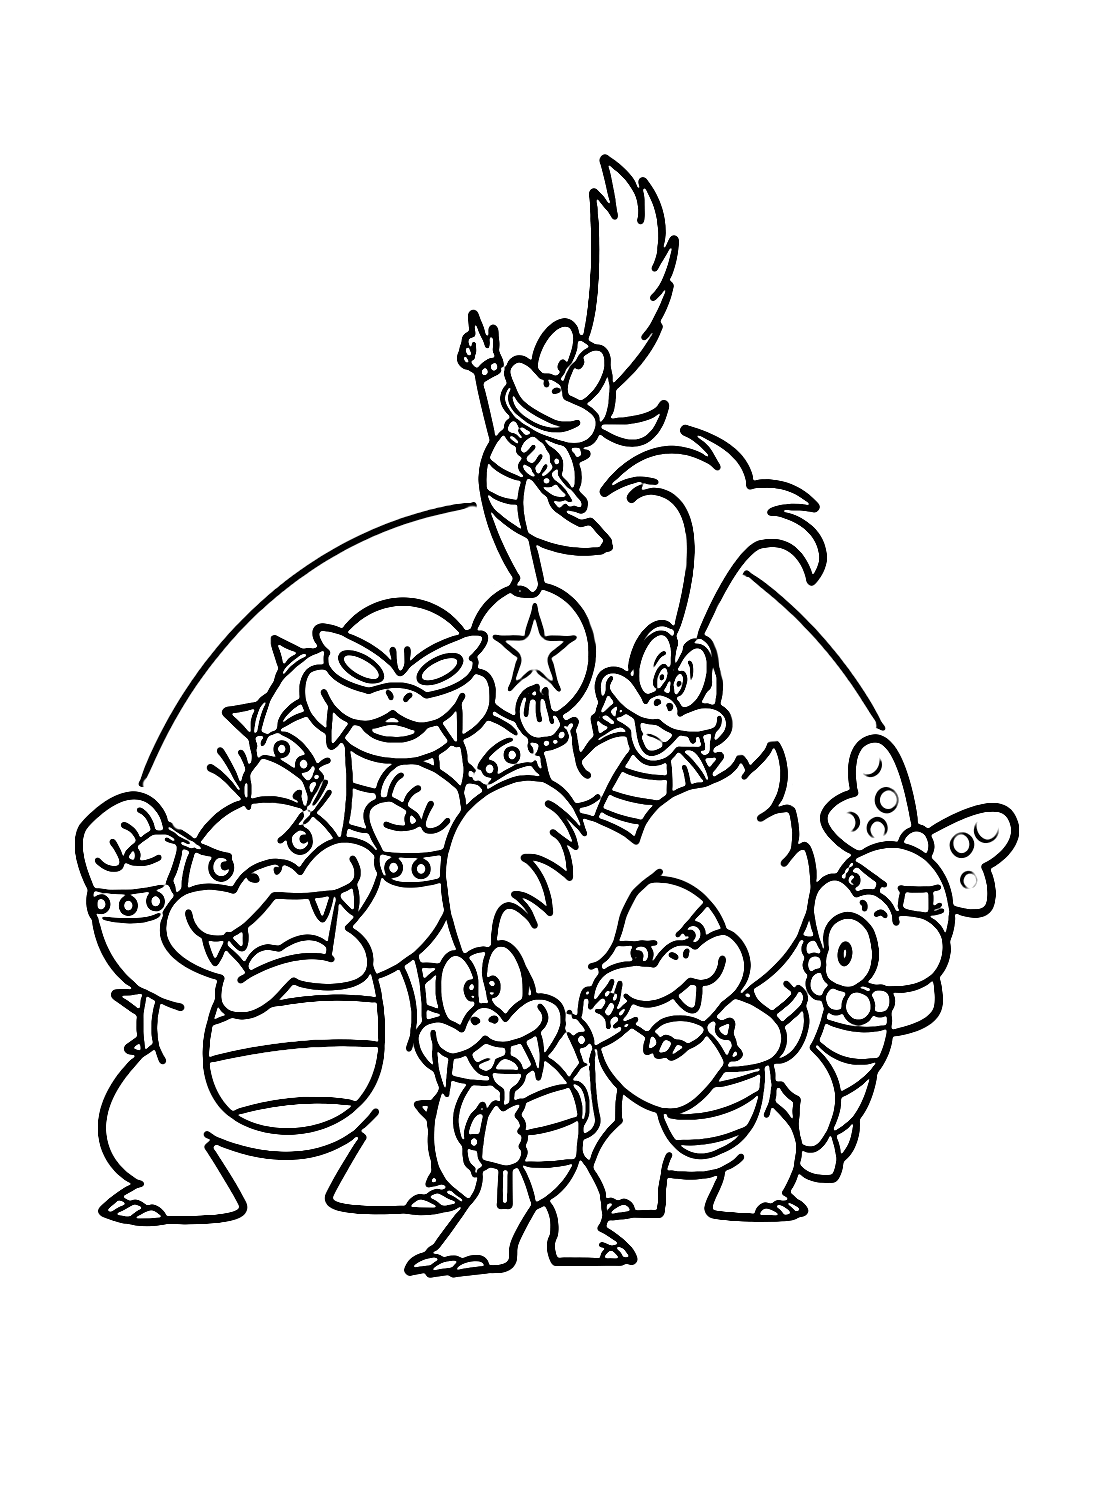 Images Koopalings Coloring Page